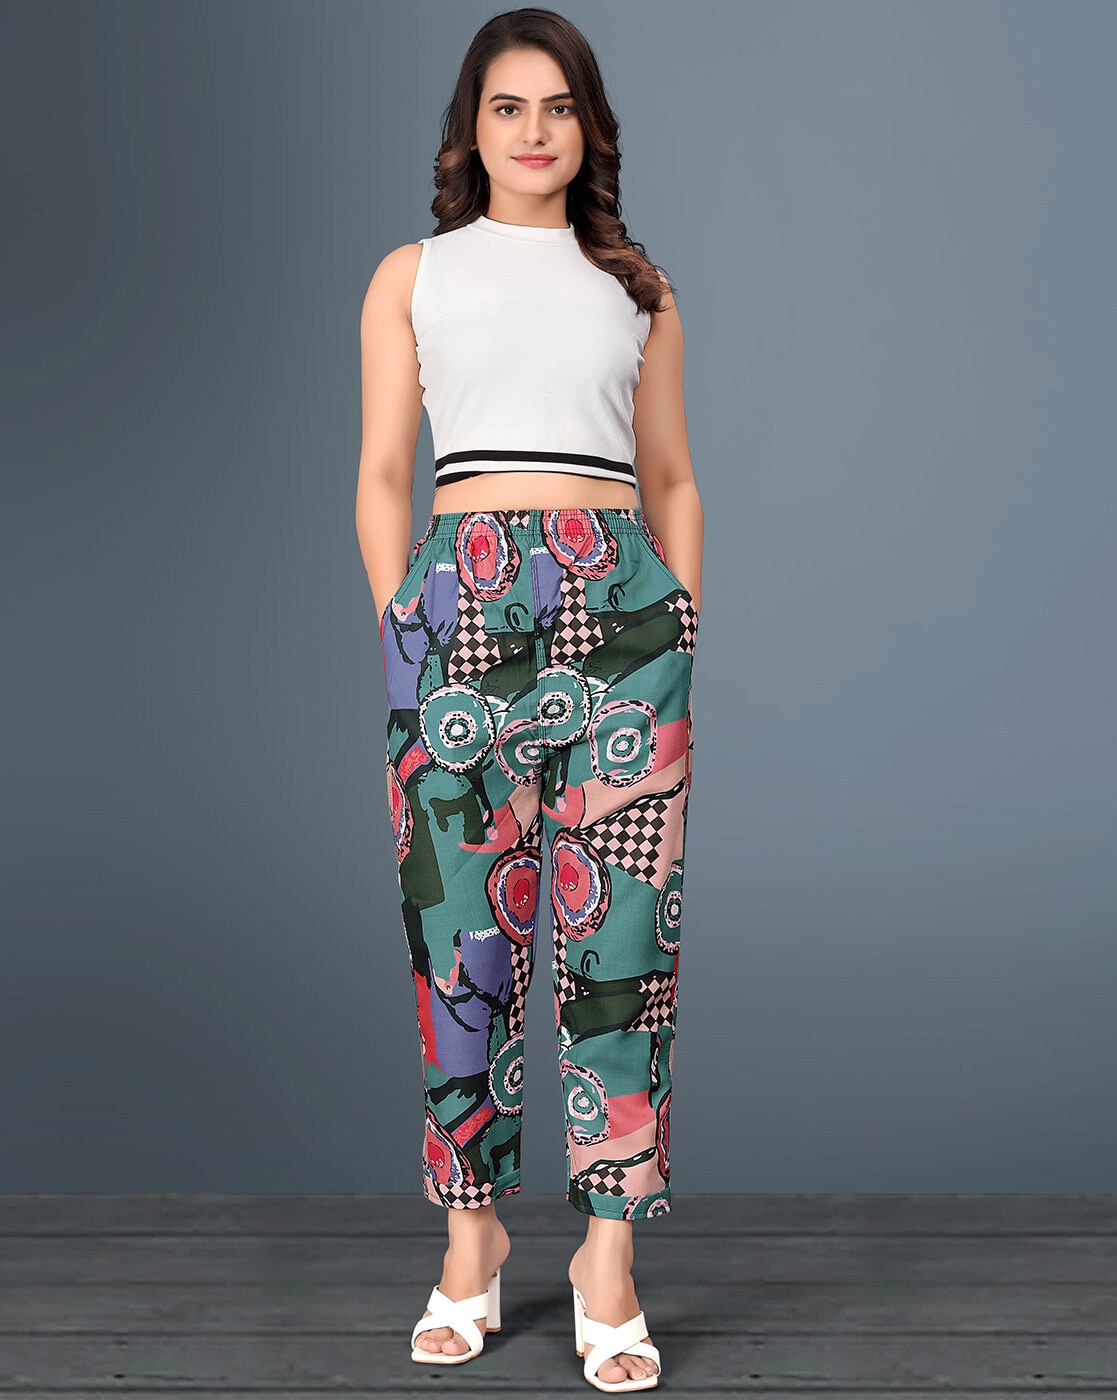 NAVY BLUE BELL BOTTOM PANTS FOR WOMEN at Rs 249, Surat